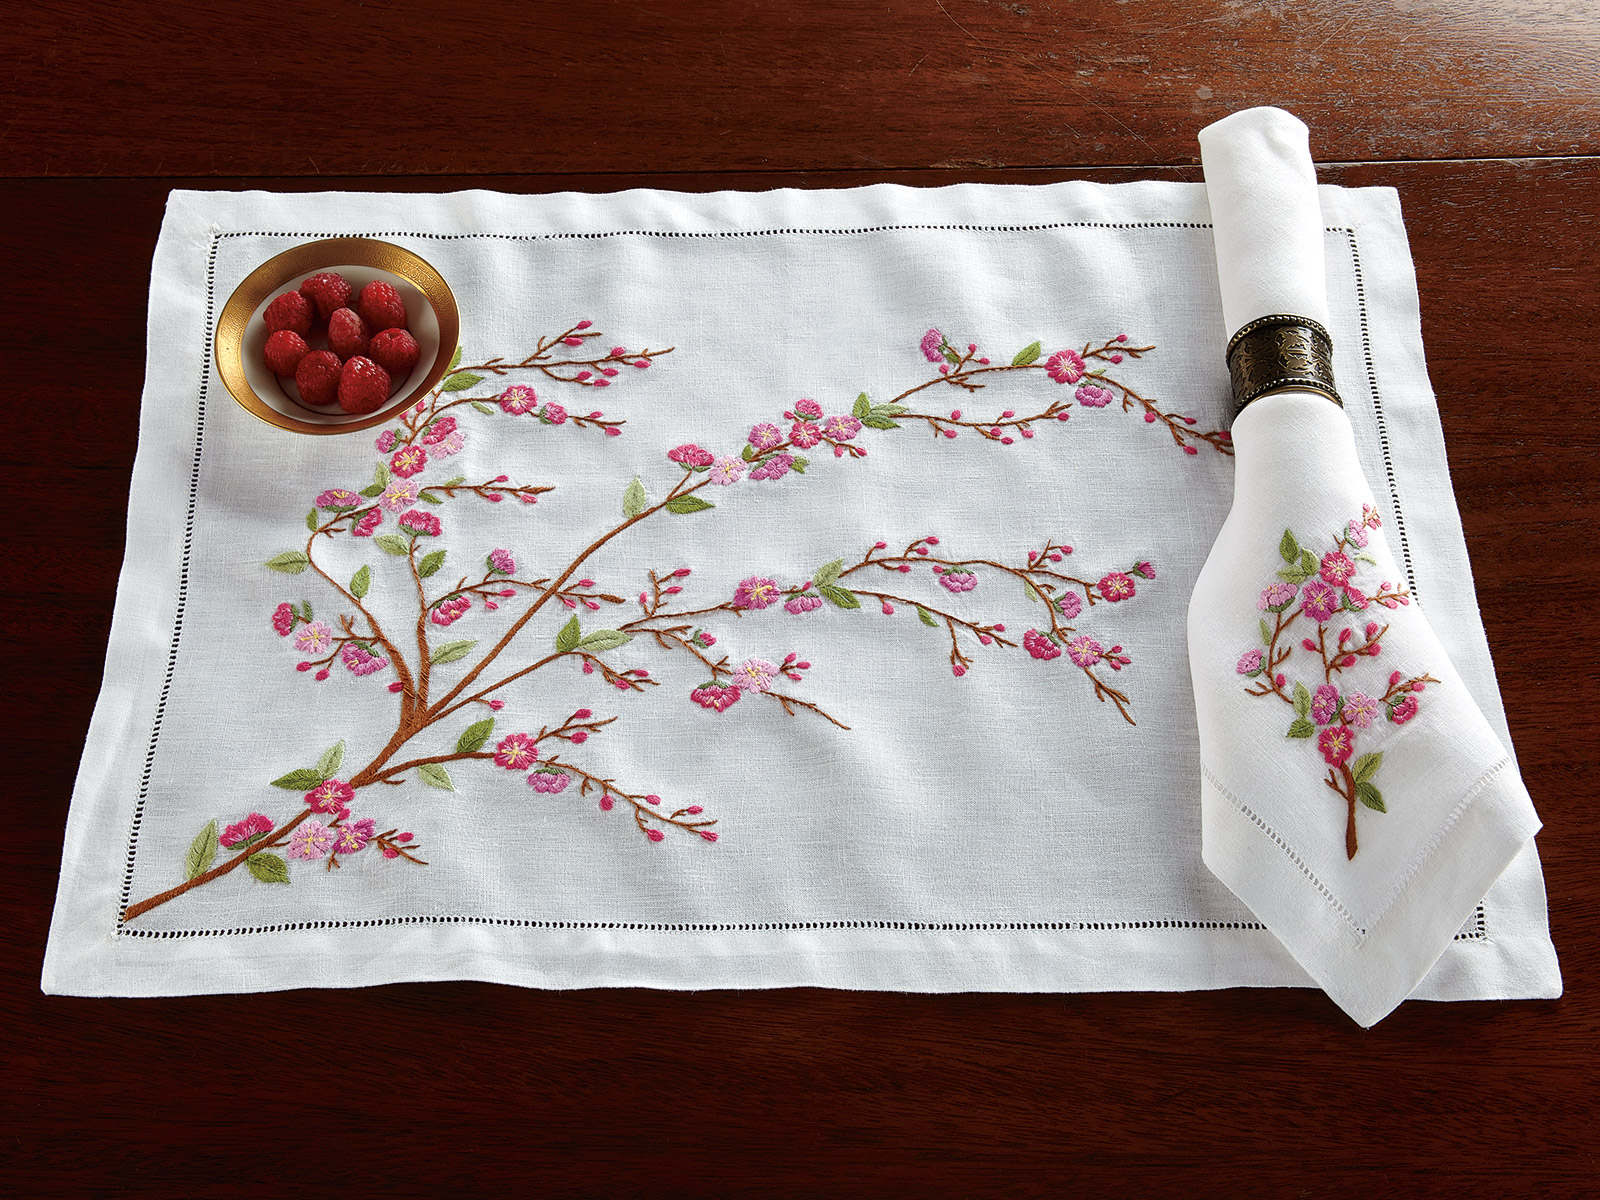 WOZO Spring Cherry Oriental Blossom Placemat Table Mat Paris Eiffel Tower France 12 x 18 Polyester Table Place Mat for Kitchen Dining Room 1 Piece